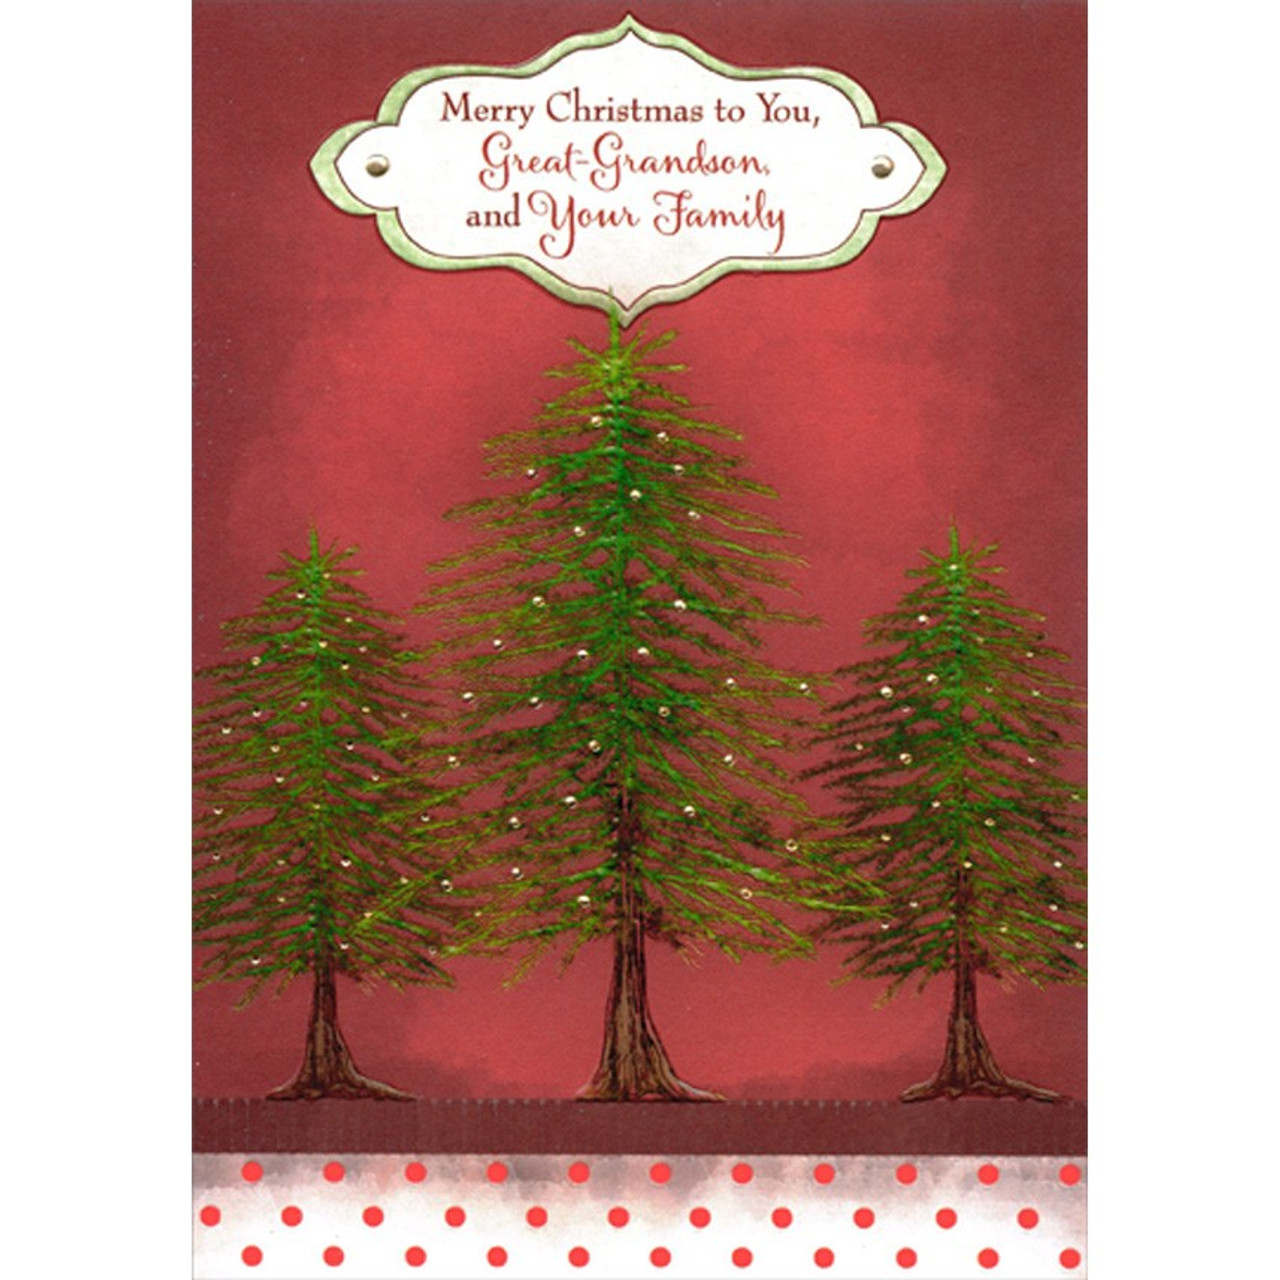 https://cdn11.bigcommerce.com/s-o3ewkiqyx3/images/stencil/1280x1280/products/5360/11134/cd17341-three-evergreen-trees-with-gold-foil-ornaments-on-dark-red-christmas-card-for-great-grandson-and-family__98380.1656366185.jpg?c=1